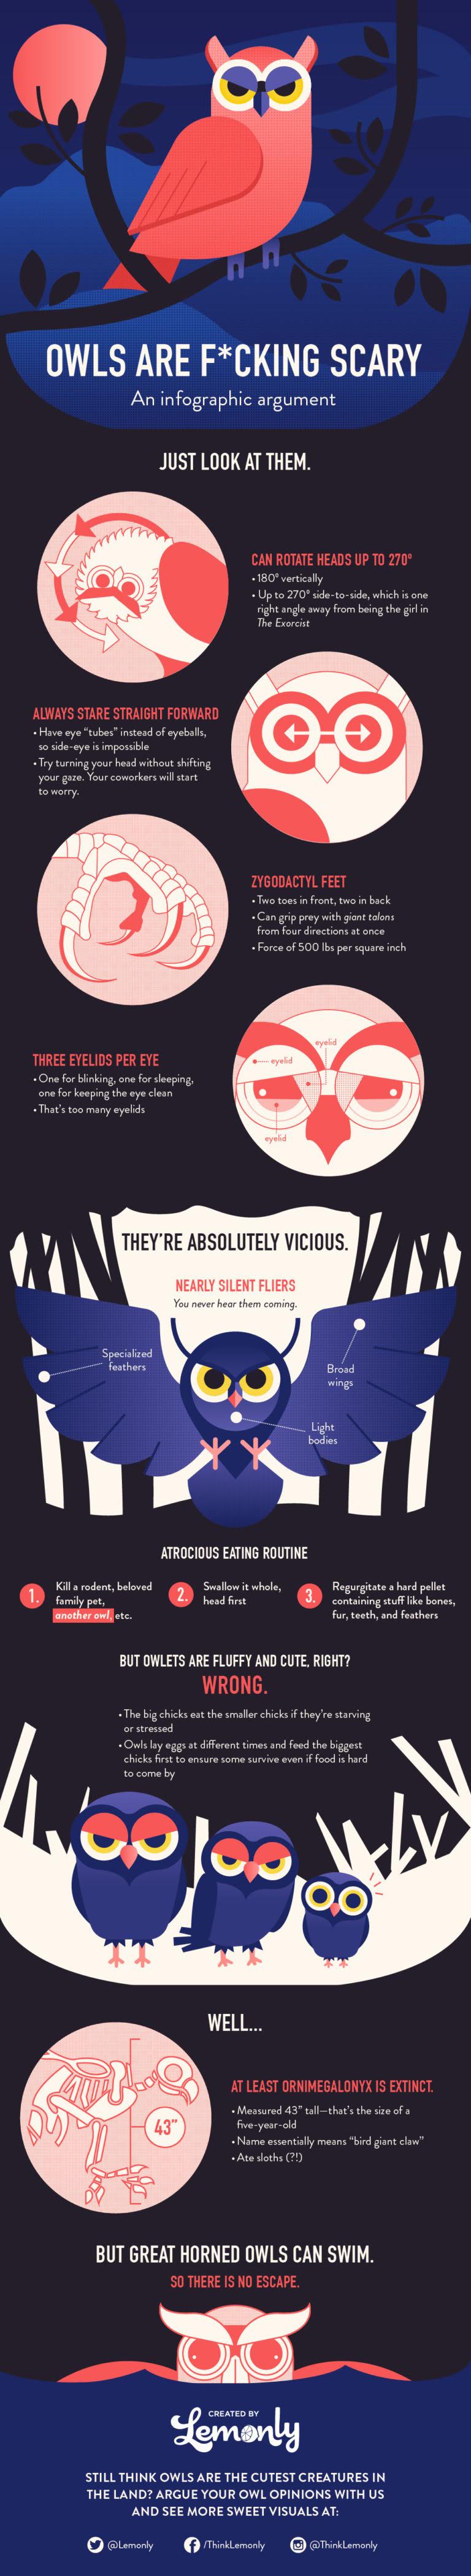 OWLS are scary an argument #infographic